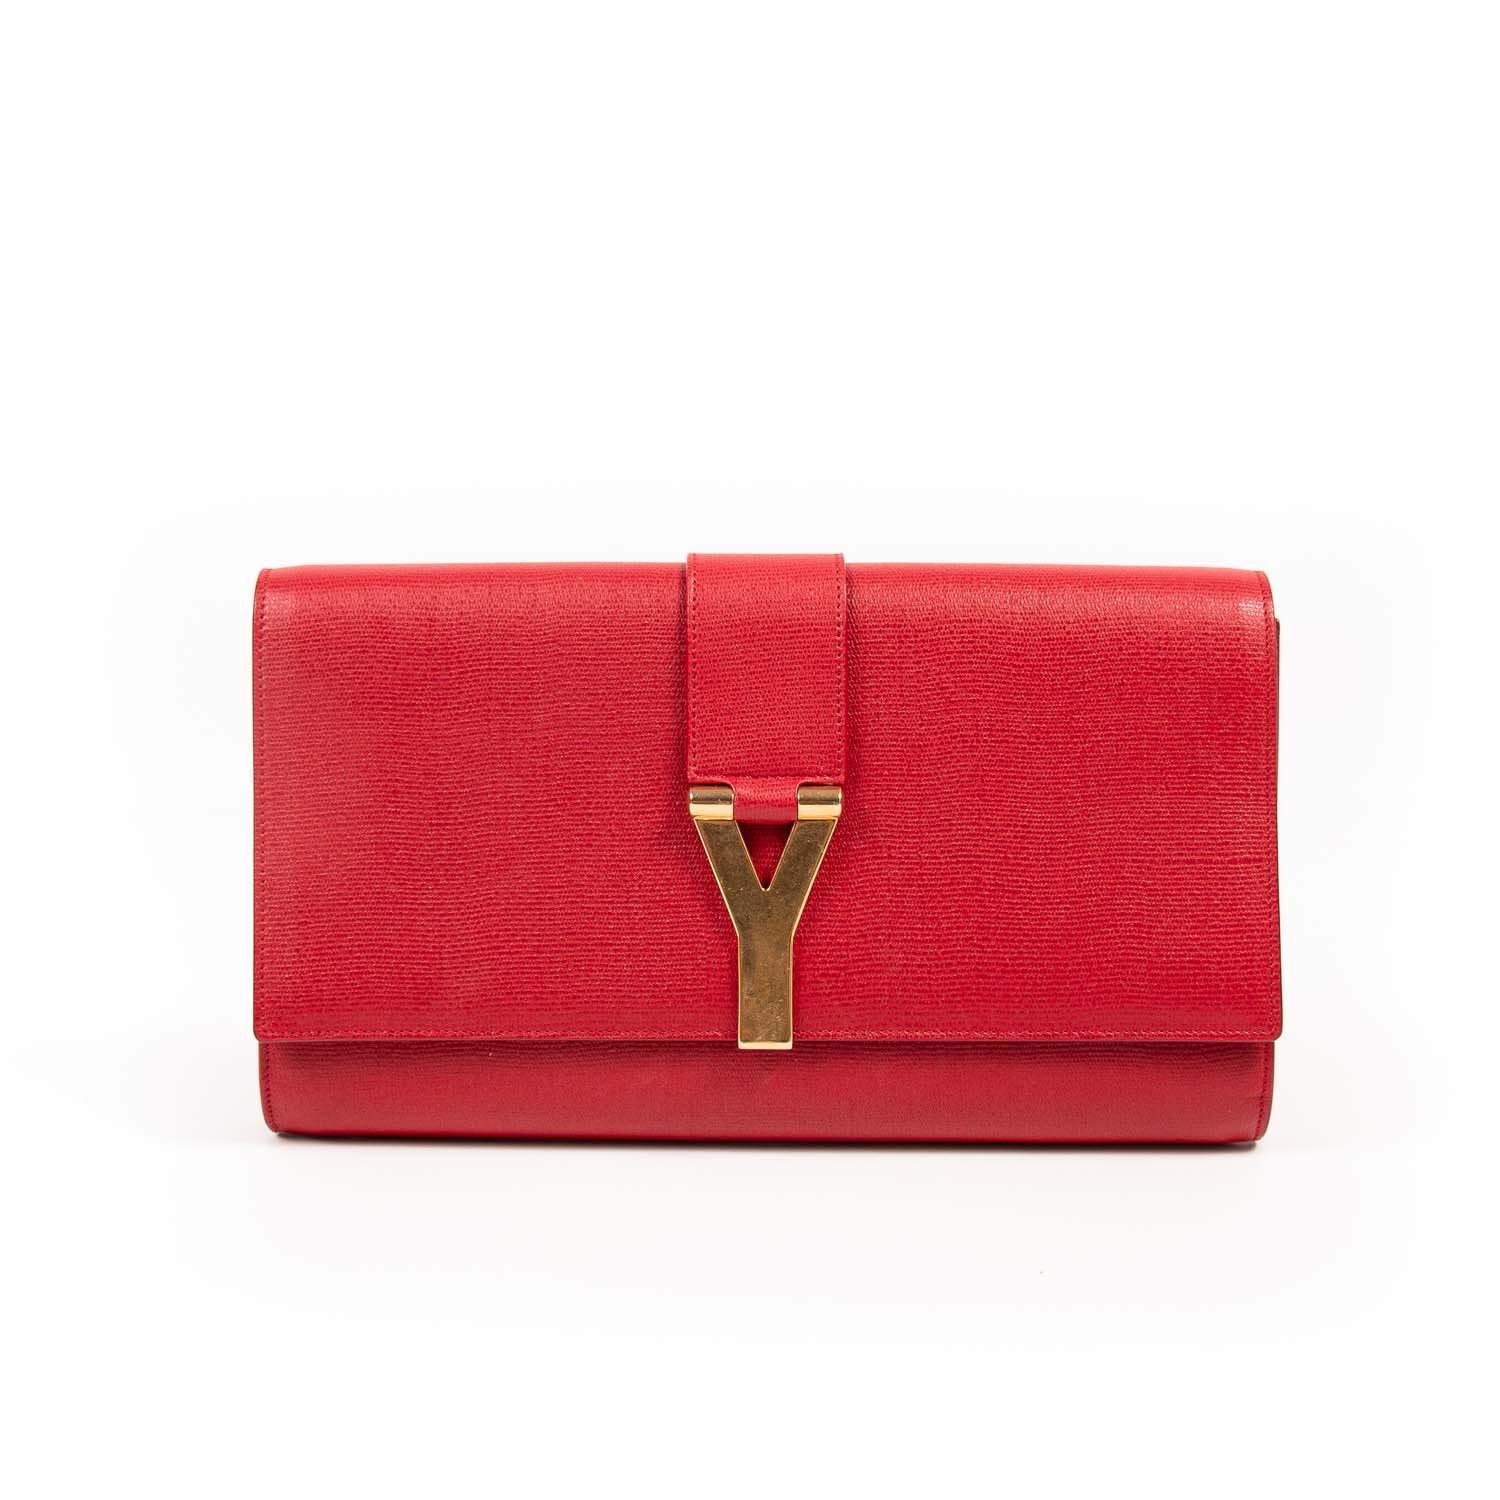 Buy & Consign Authentic Saint Laurent Calfskin Classic Y Ligne Clutch Red at The Plush Posh